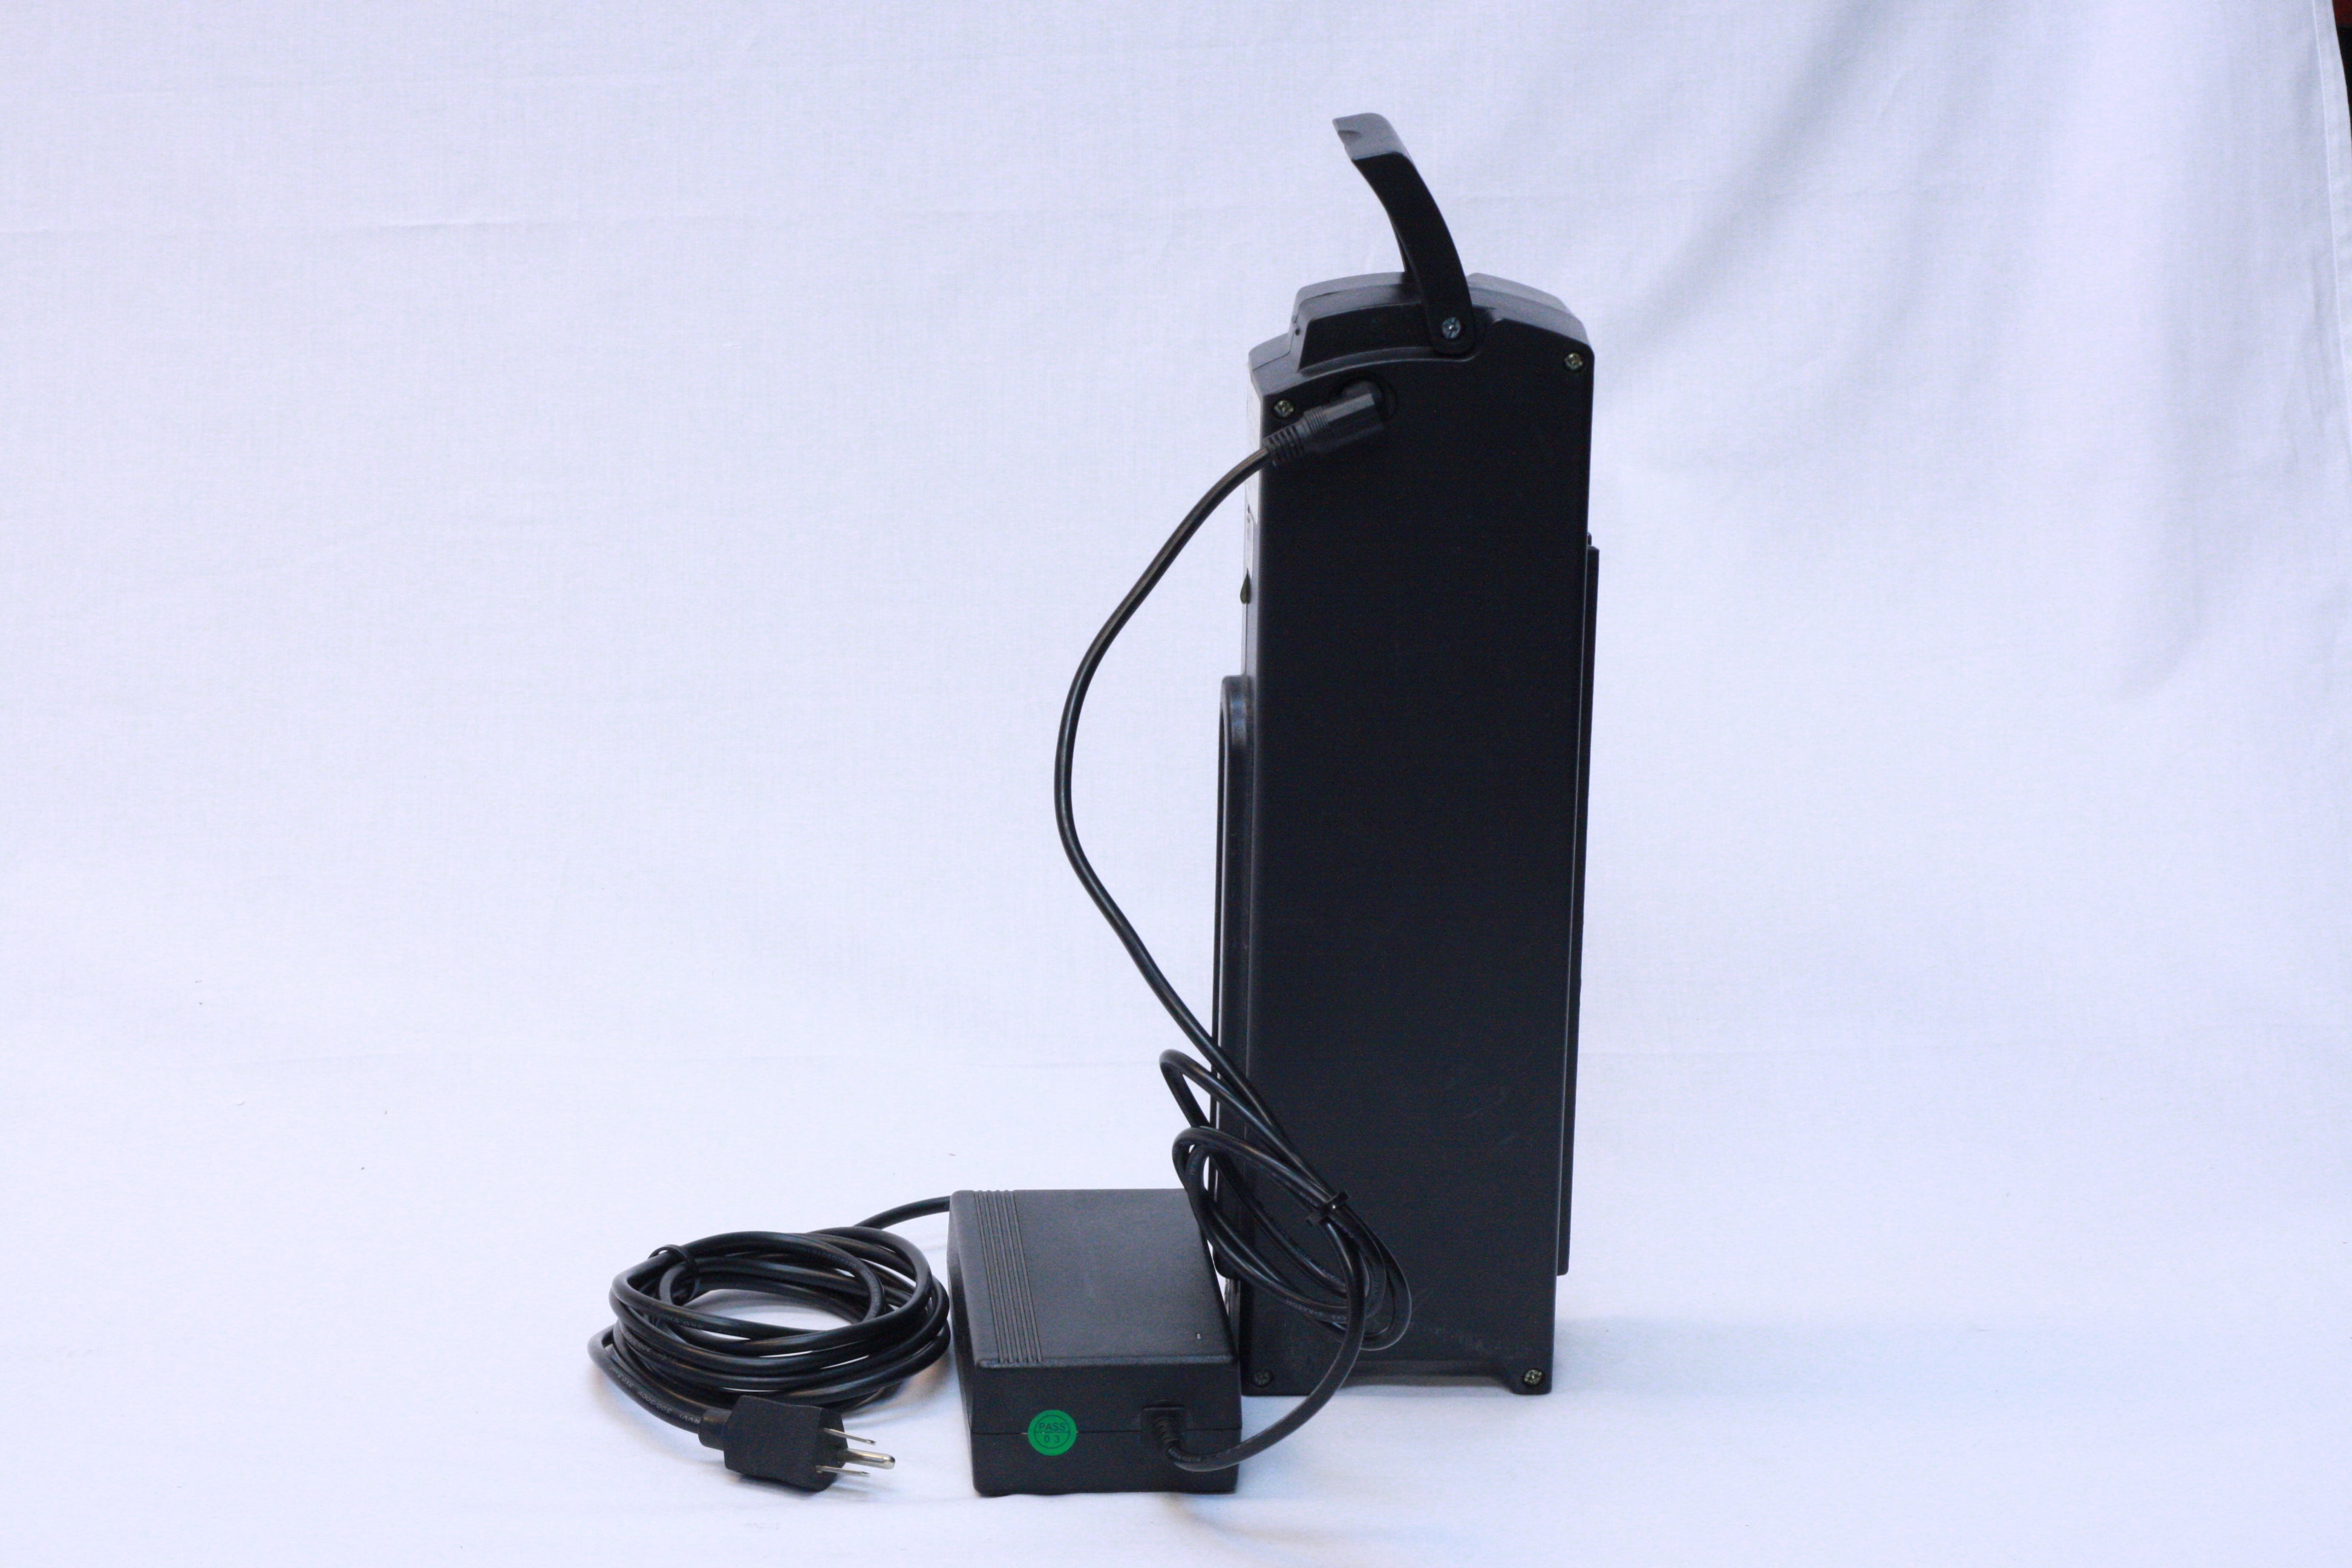 E-Bike - Battery Pack and Charger